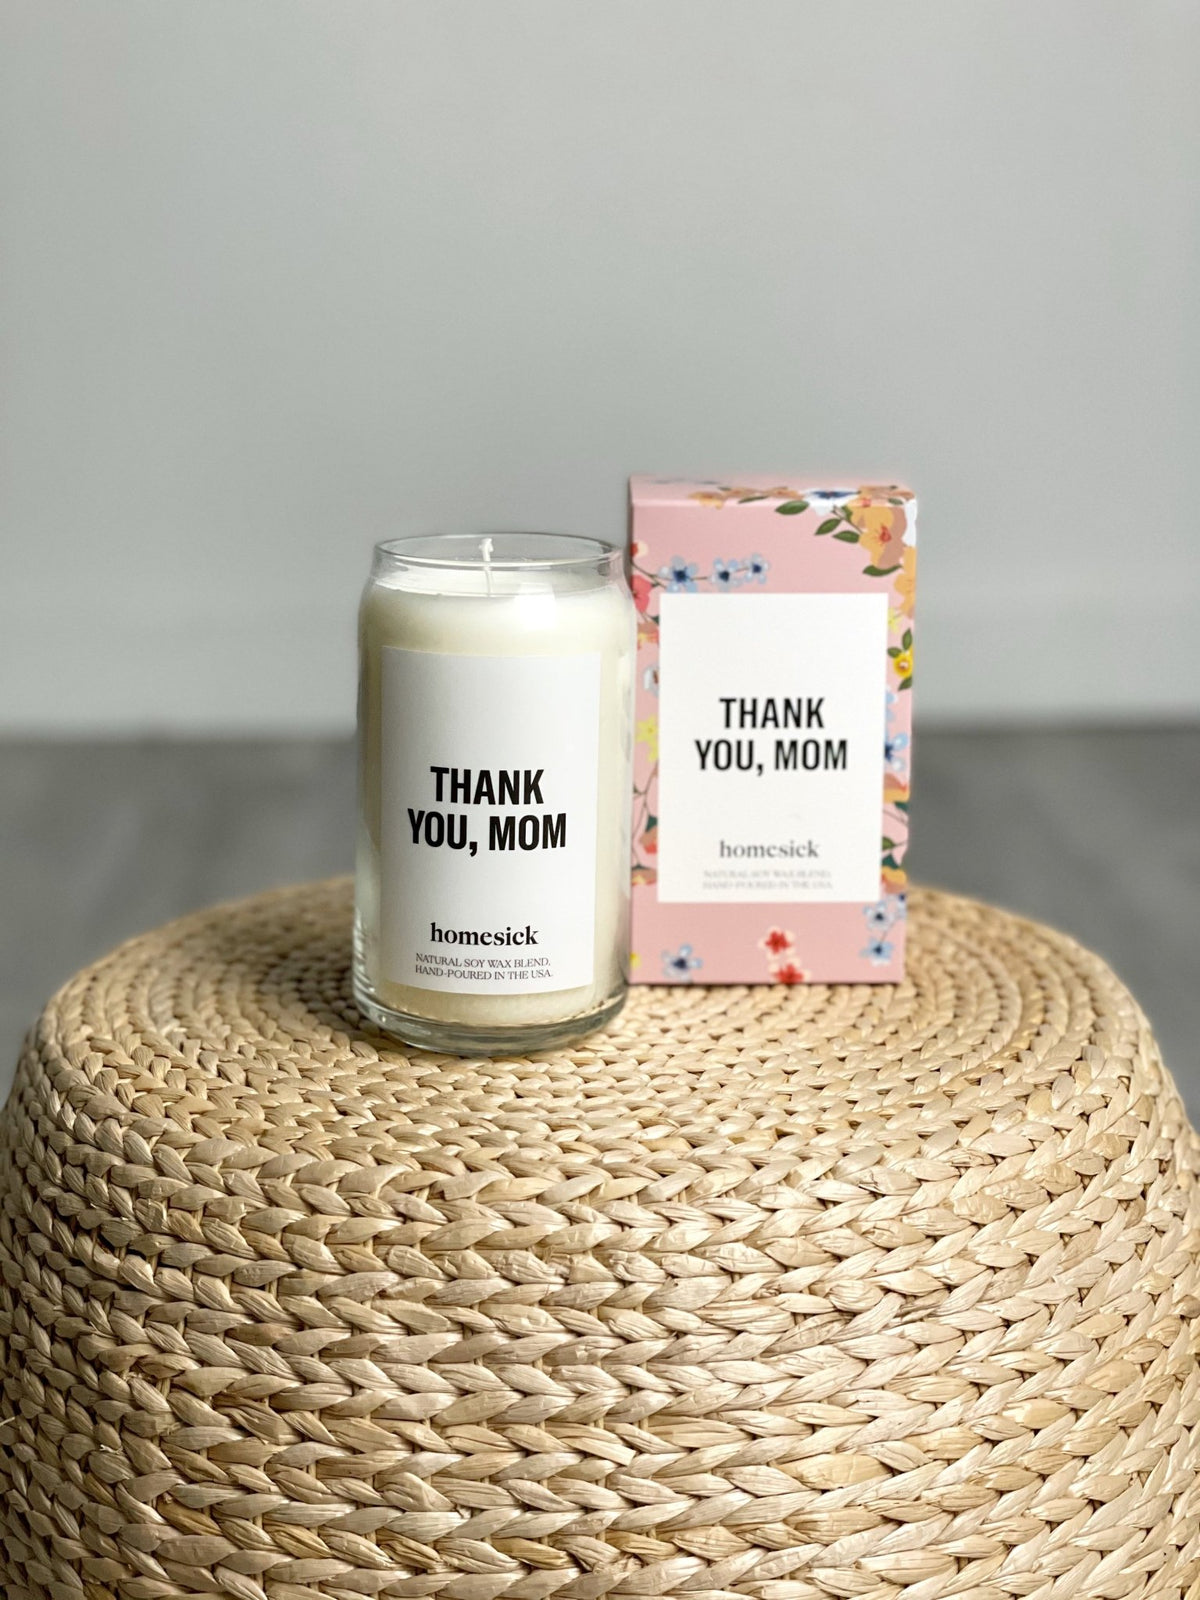 Homesick thanks mom candle - Trendy Candles at Lush Fashion Lounge Boutique in Oklahoma City